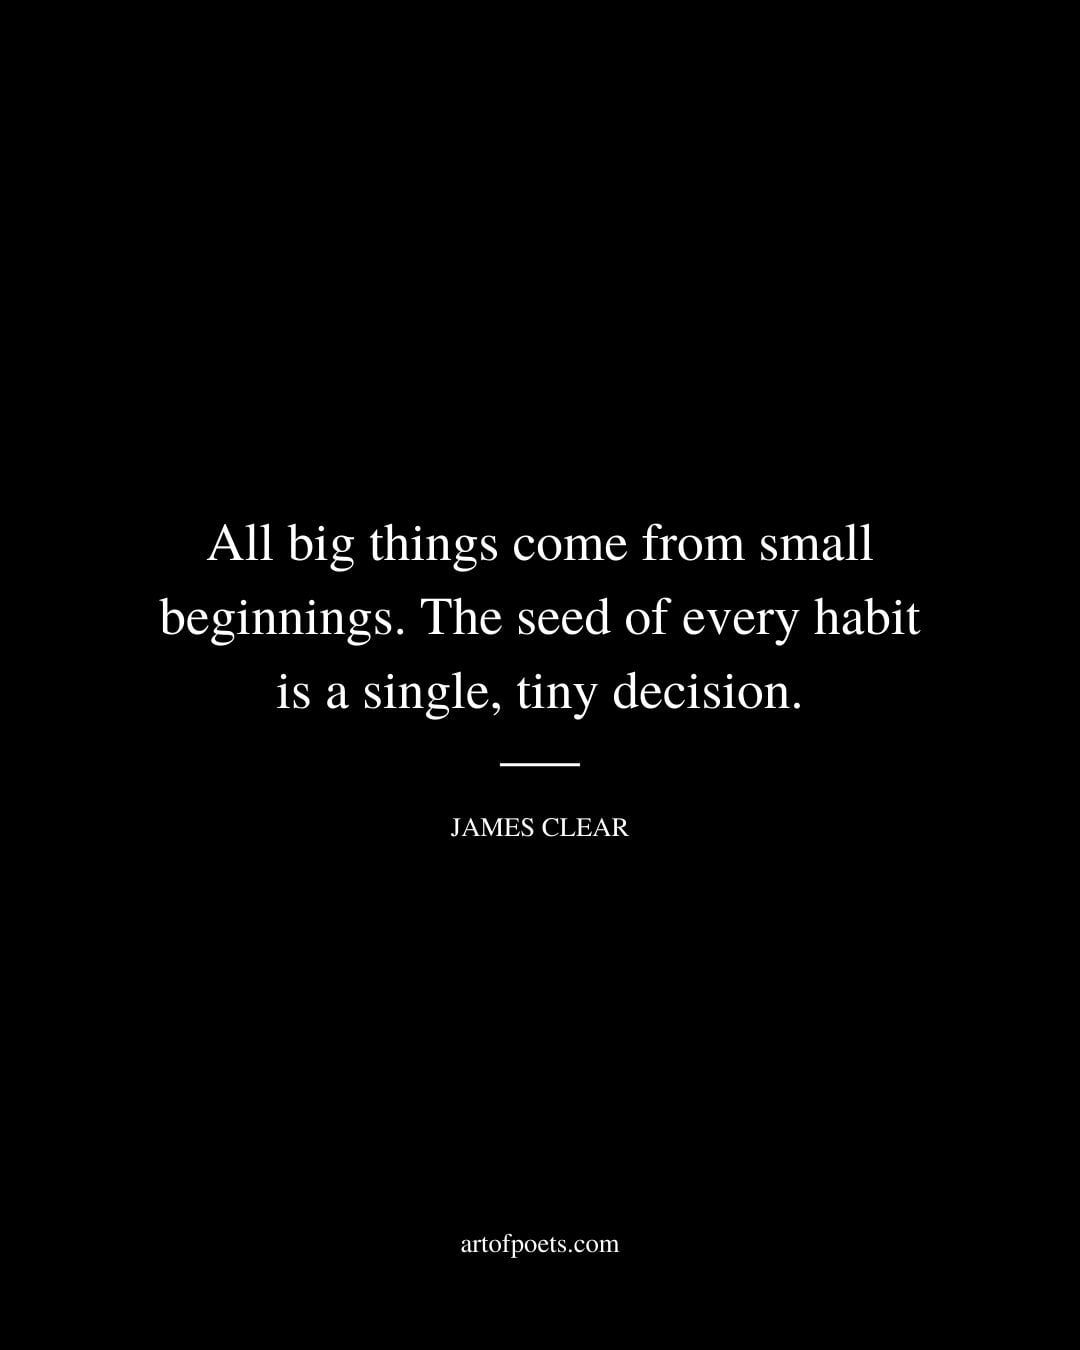 All big things come from small beginnings. The seed of every habit is a single tiny decision